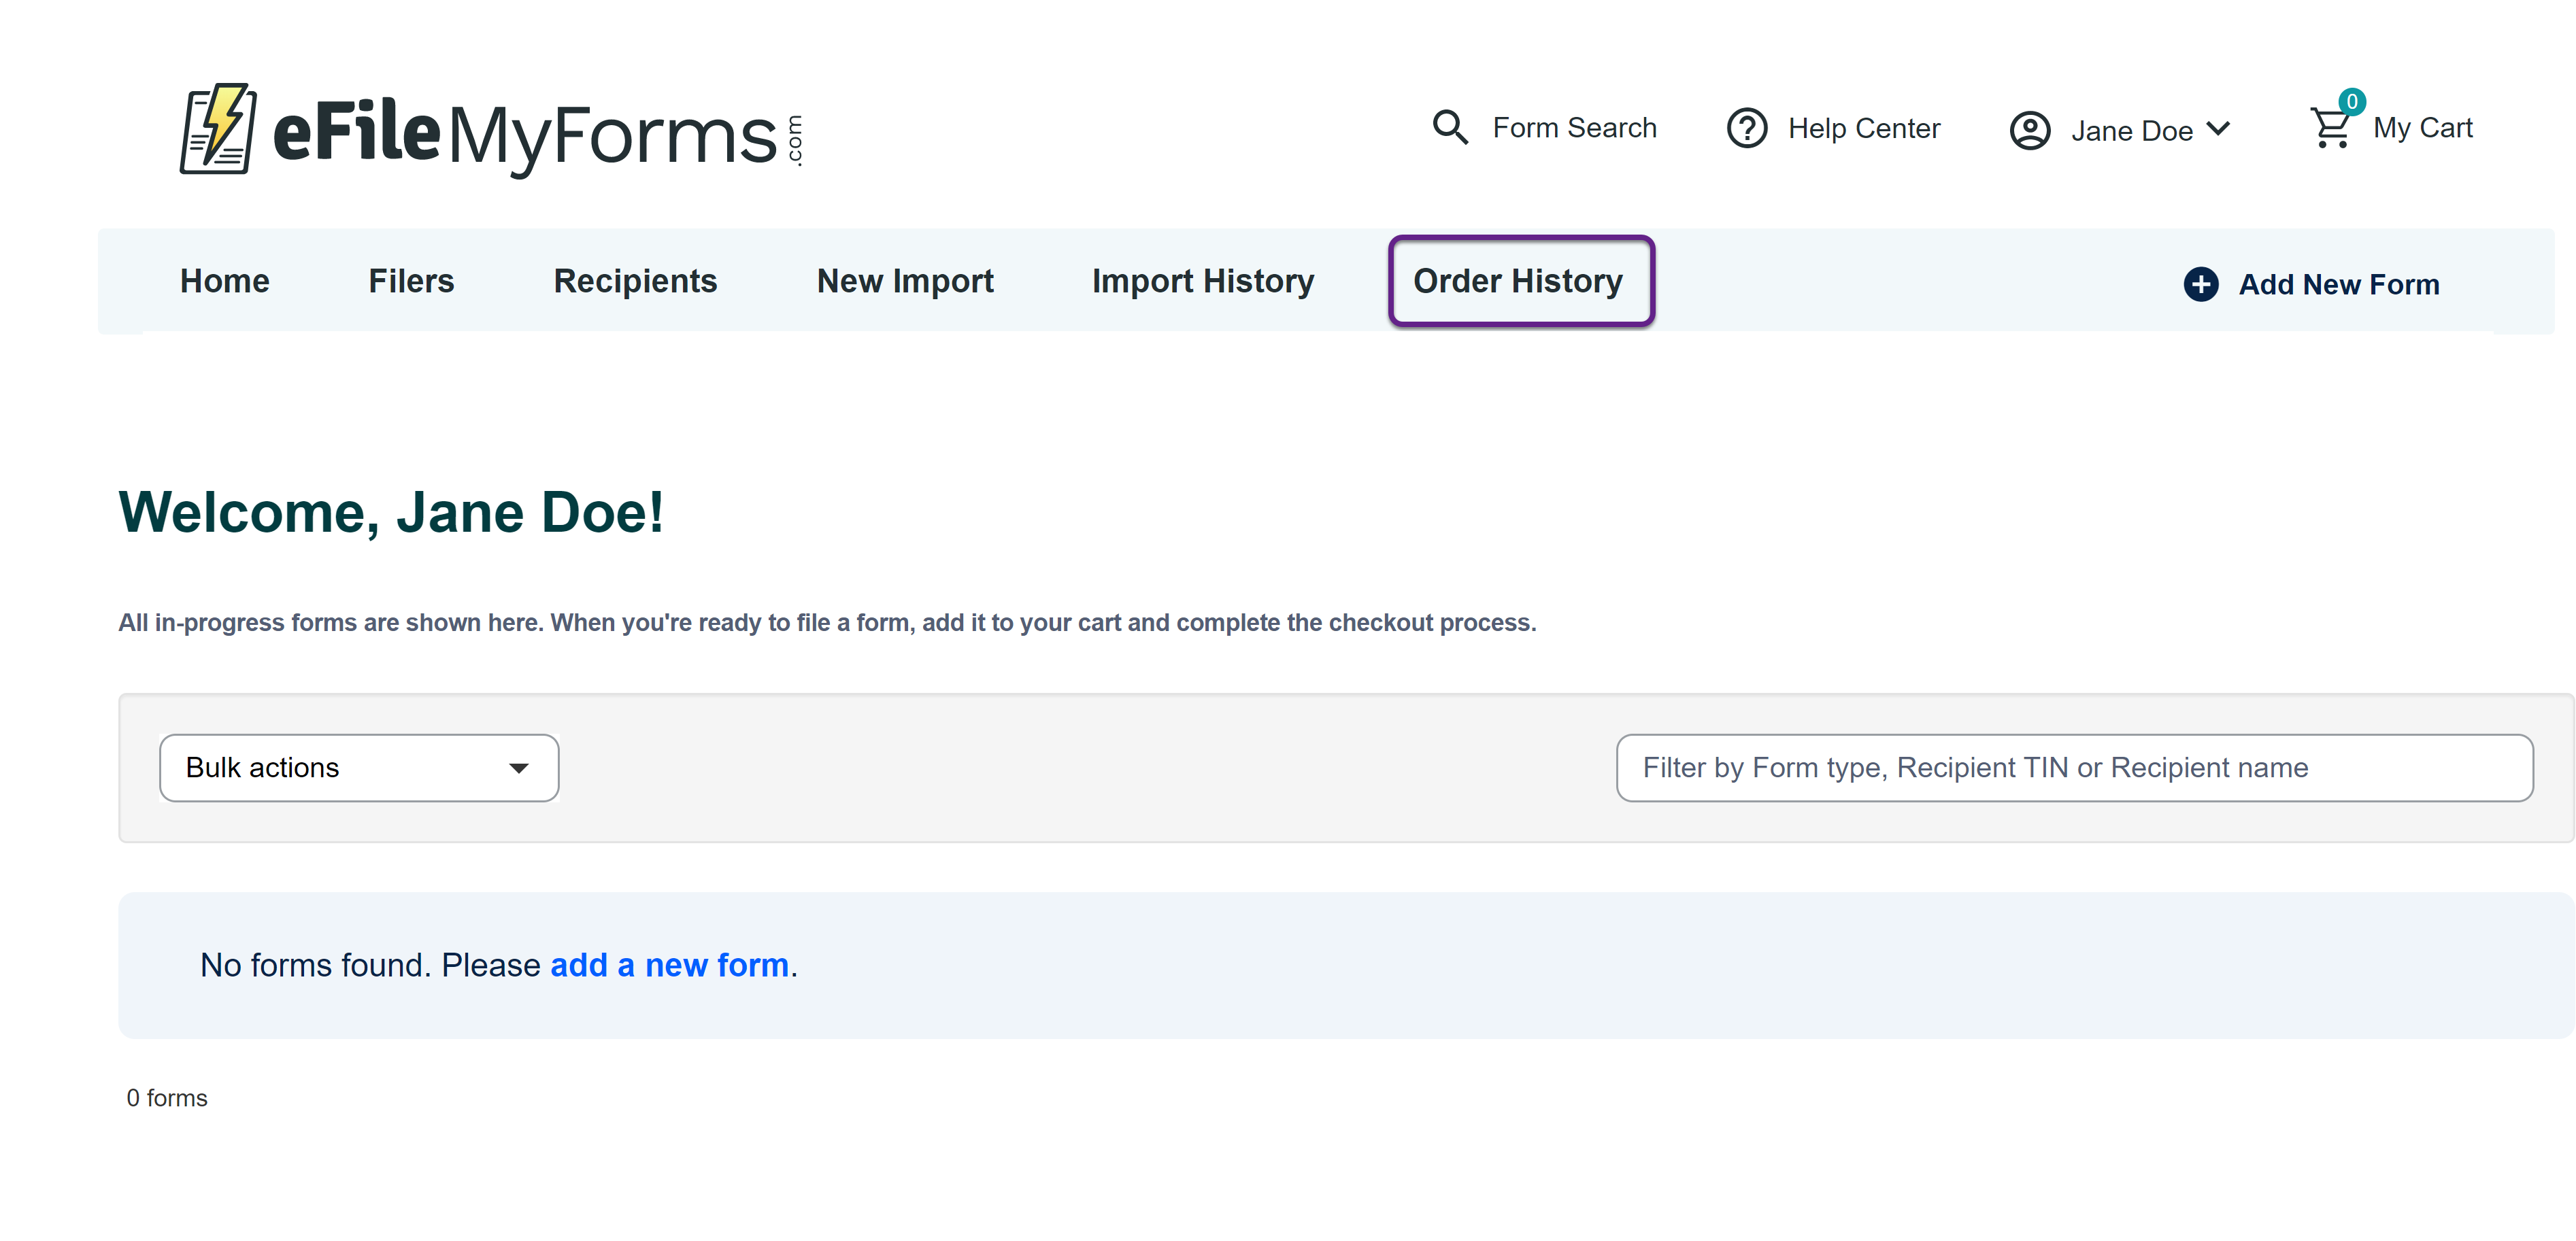 Image of the eFileMyForms home page with a callout on the Order History tab.